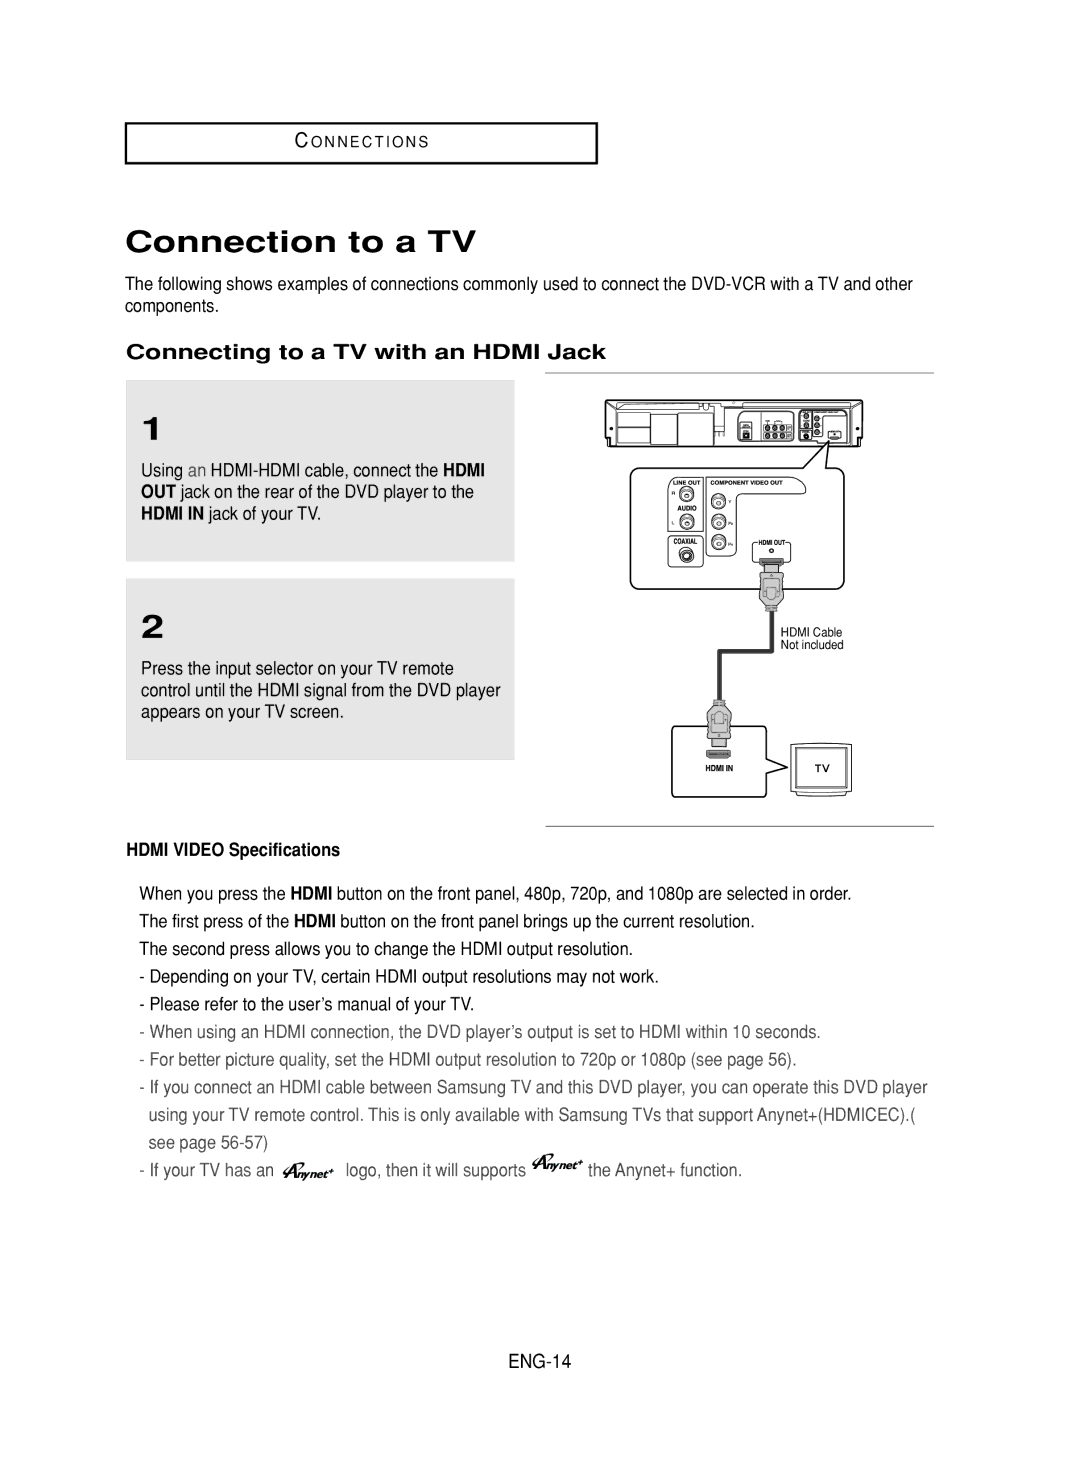 Samsung DVD-V9800 Connection to a TV, Connecting to a TV with an Hdmi Jack, ENG-14, Hdmi Video Specifications 